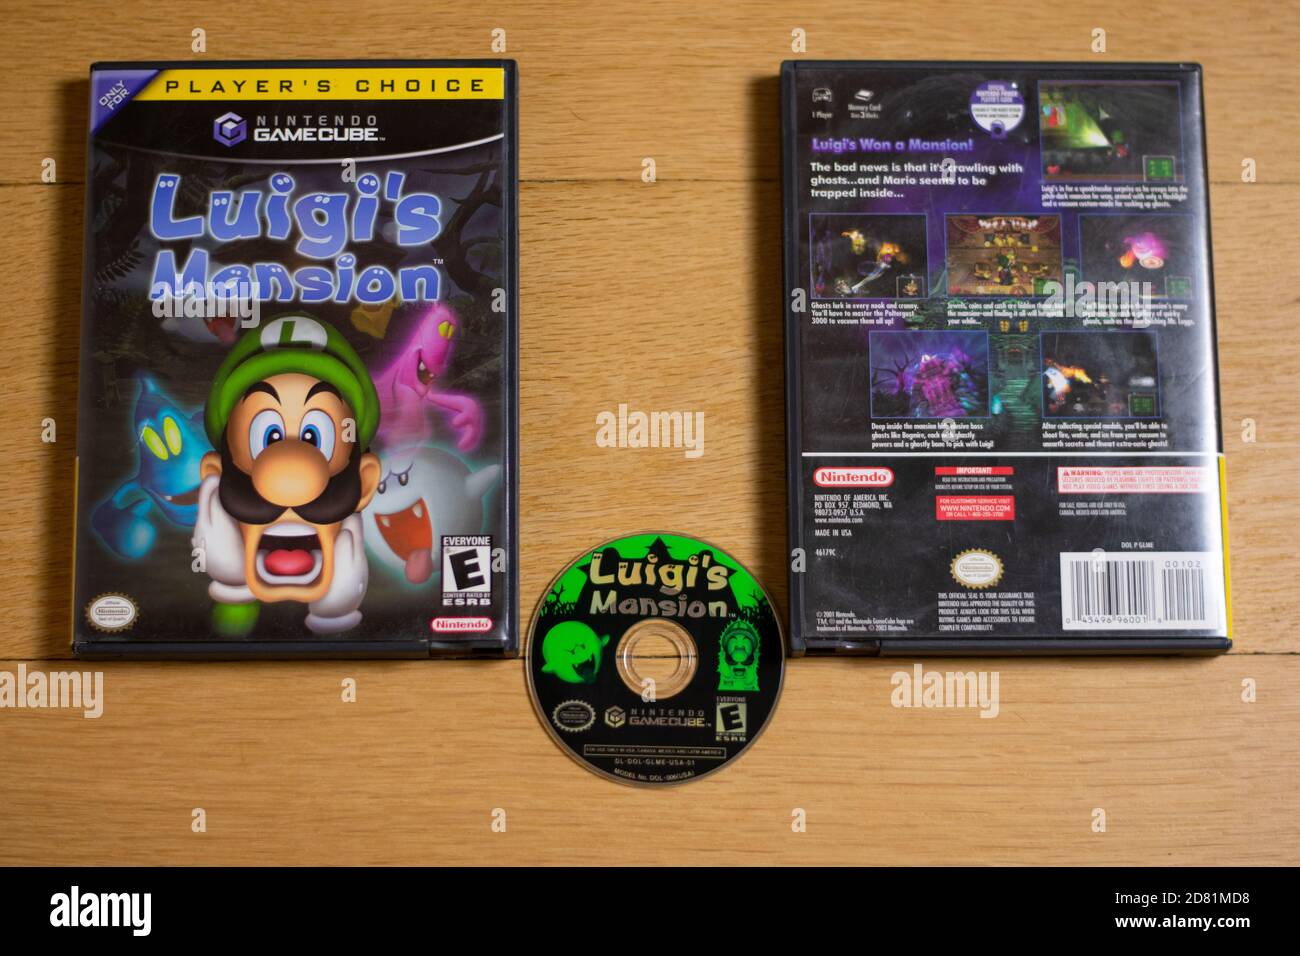 A Disc and Case for Luigi's Mansion for the Nintendo Gamecube on a wood floor. Stock Photo